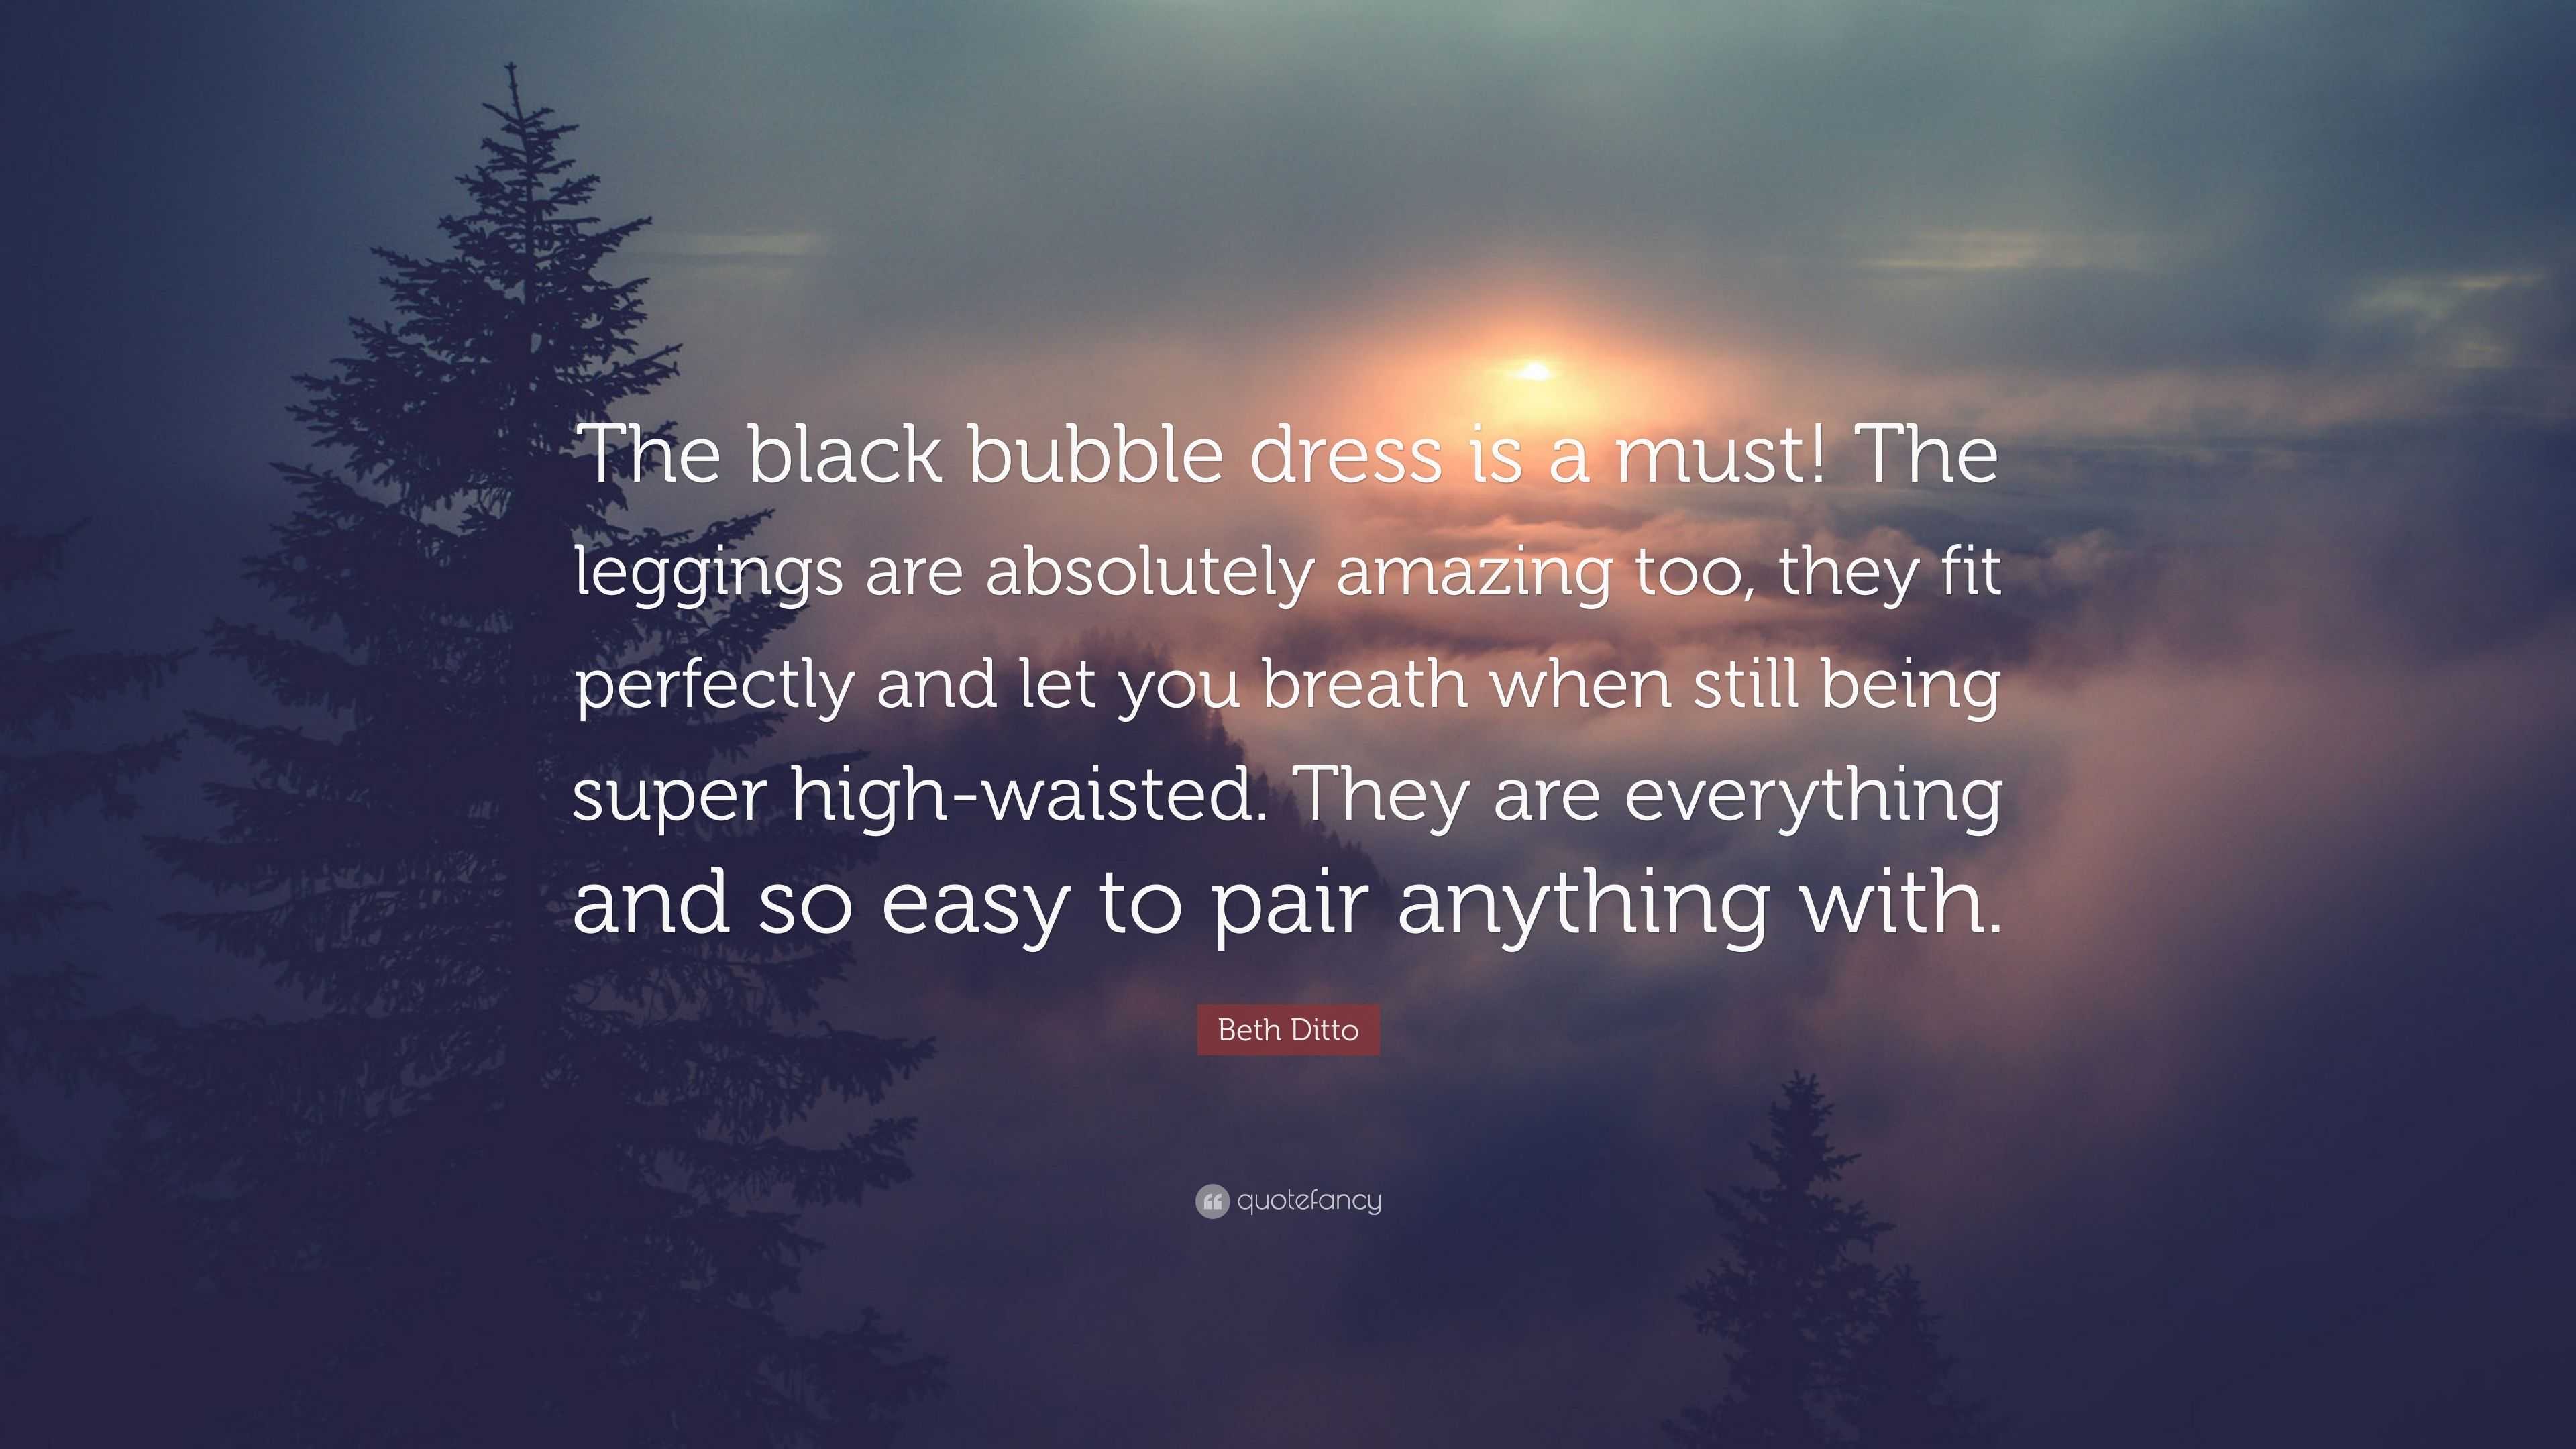 Beth Ditto Quote: “The black bubble dress is a must! The leggings are  absolutely amazing too, they fit perfectly and let you breath when st”